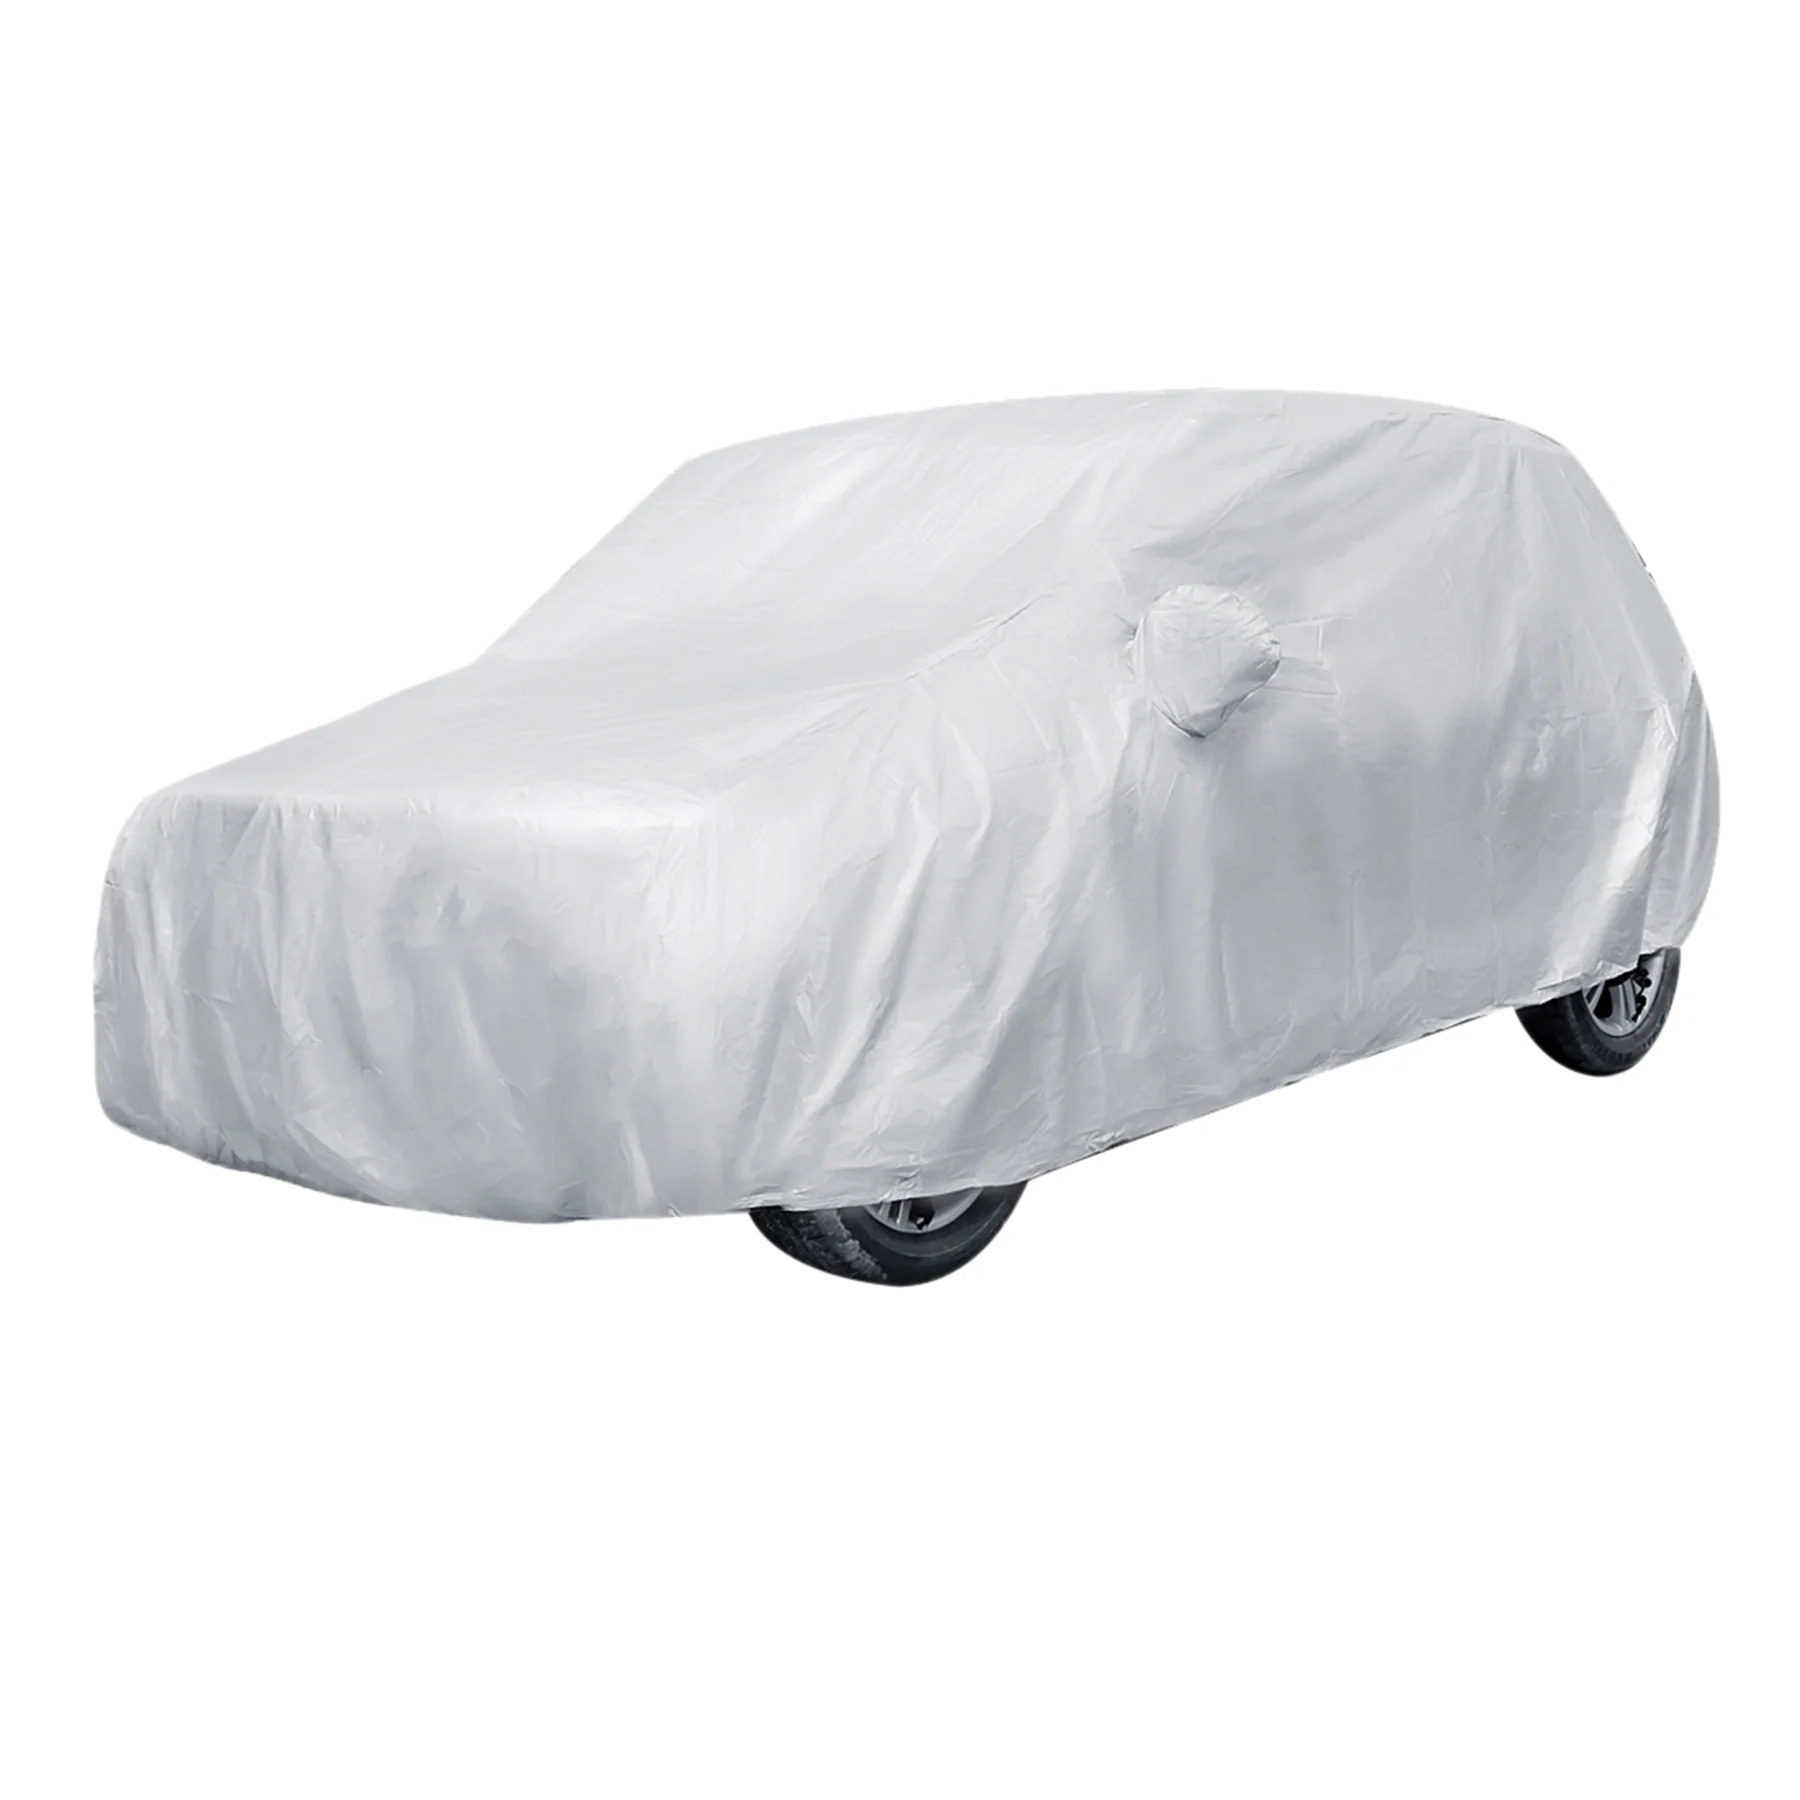 Breathable Water Resistant Car Cover 206", Silver Color, 190T Polyester, 20% Off All Sizes (185" - 268") $22.16